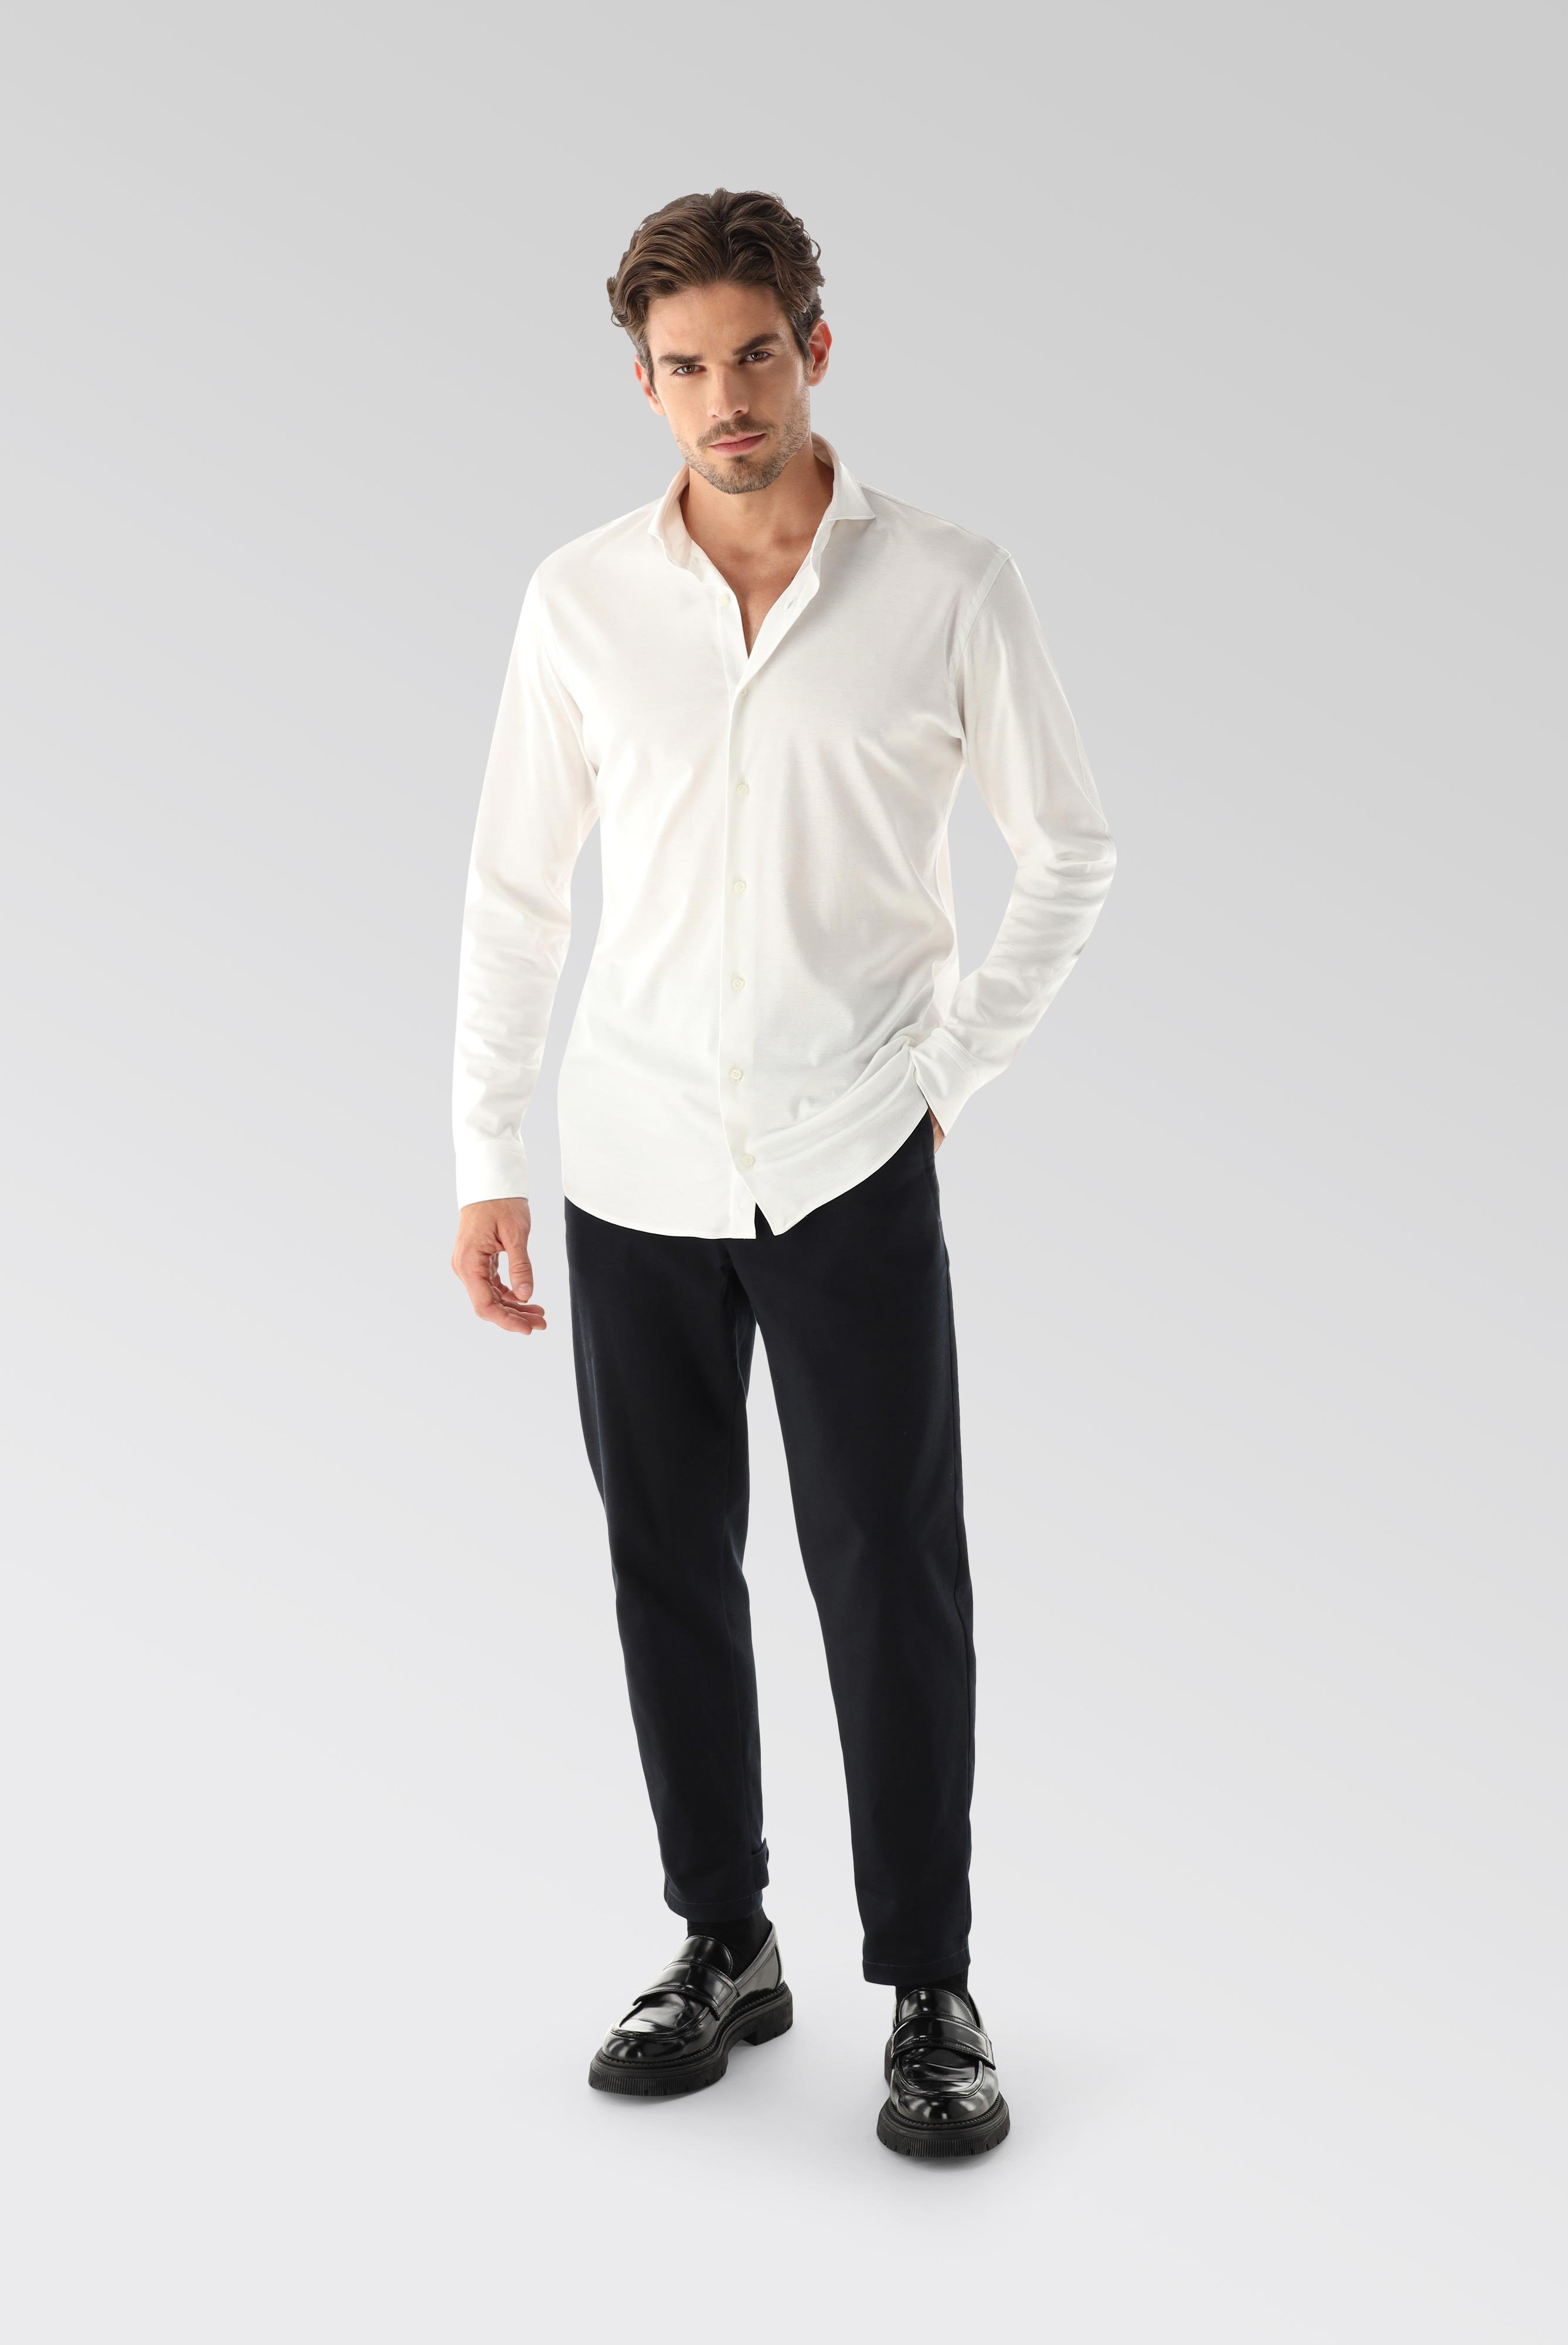 Easy Iron Shirts+Swiss Cotton Jersey Shirt Tailor Fit+20.1683.UC.180031.000.L